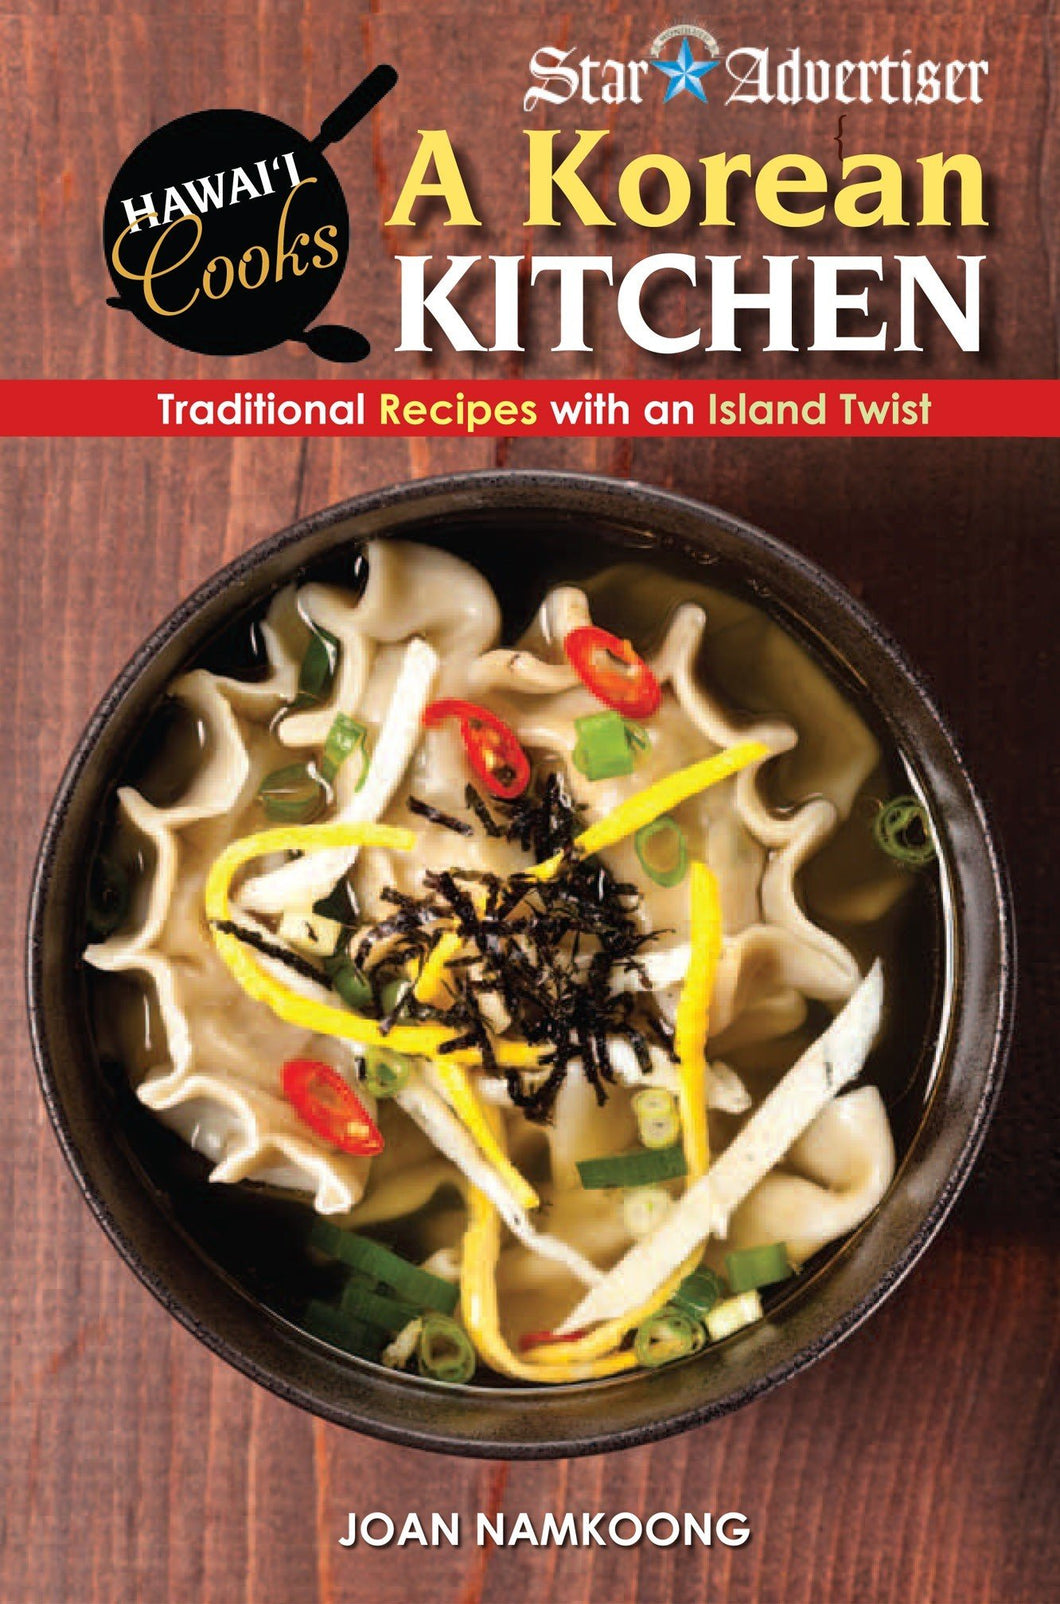 A Korean Kitchen: Traditonal Recipes With an Island Twist (Hawaii Cooks) by Joan Namkoong